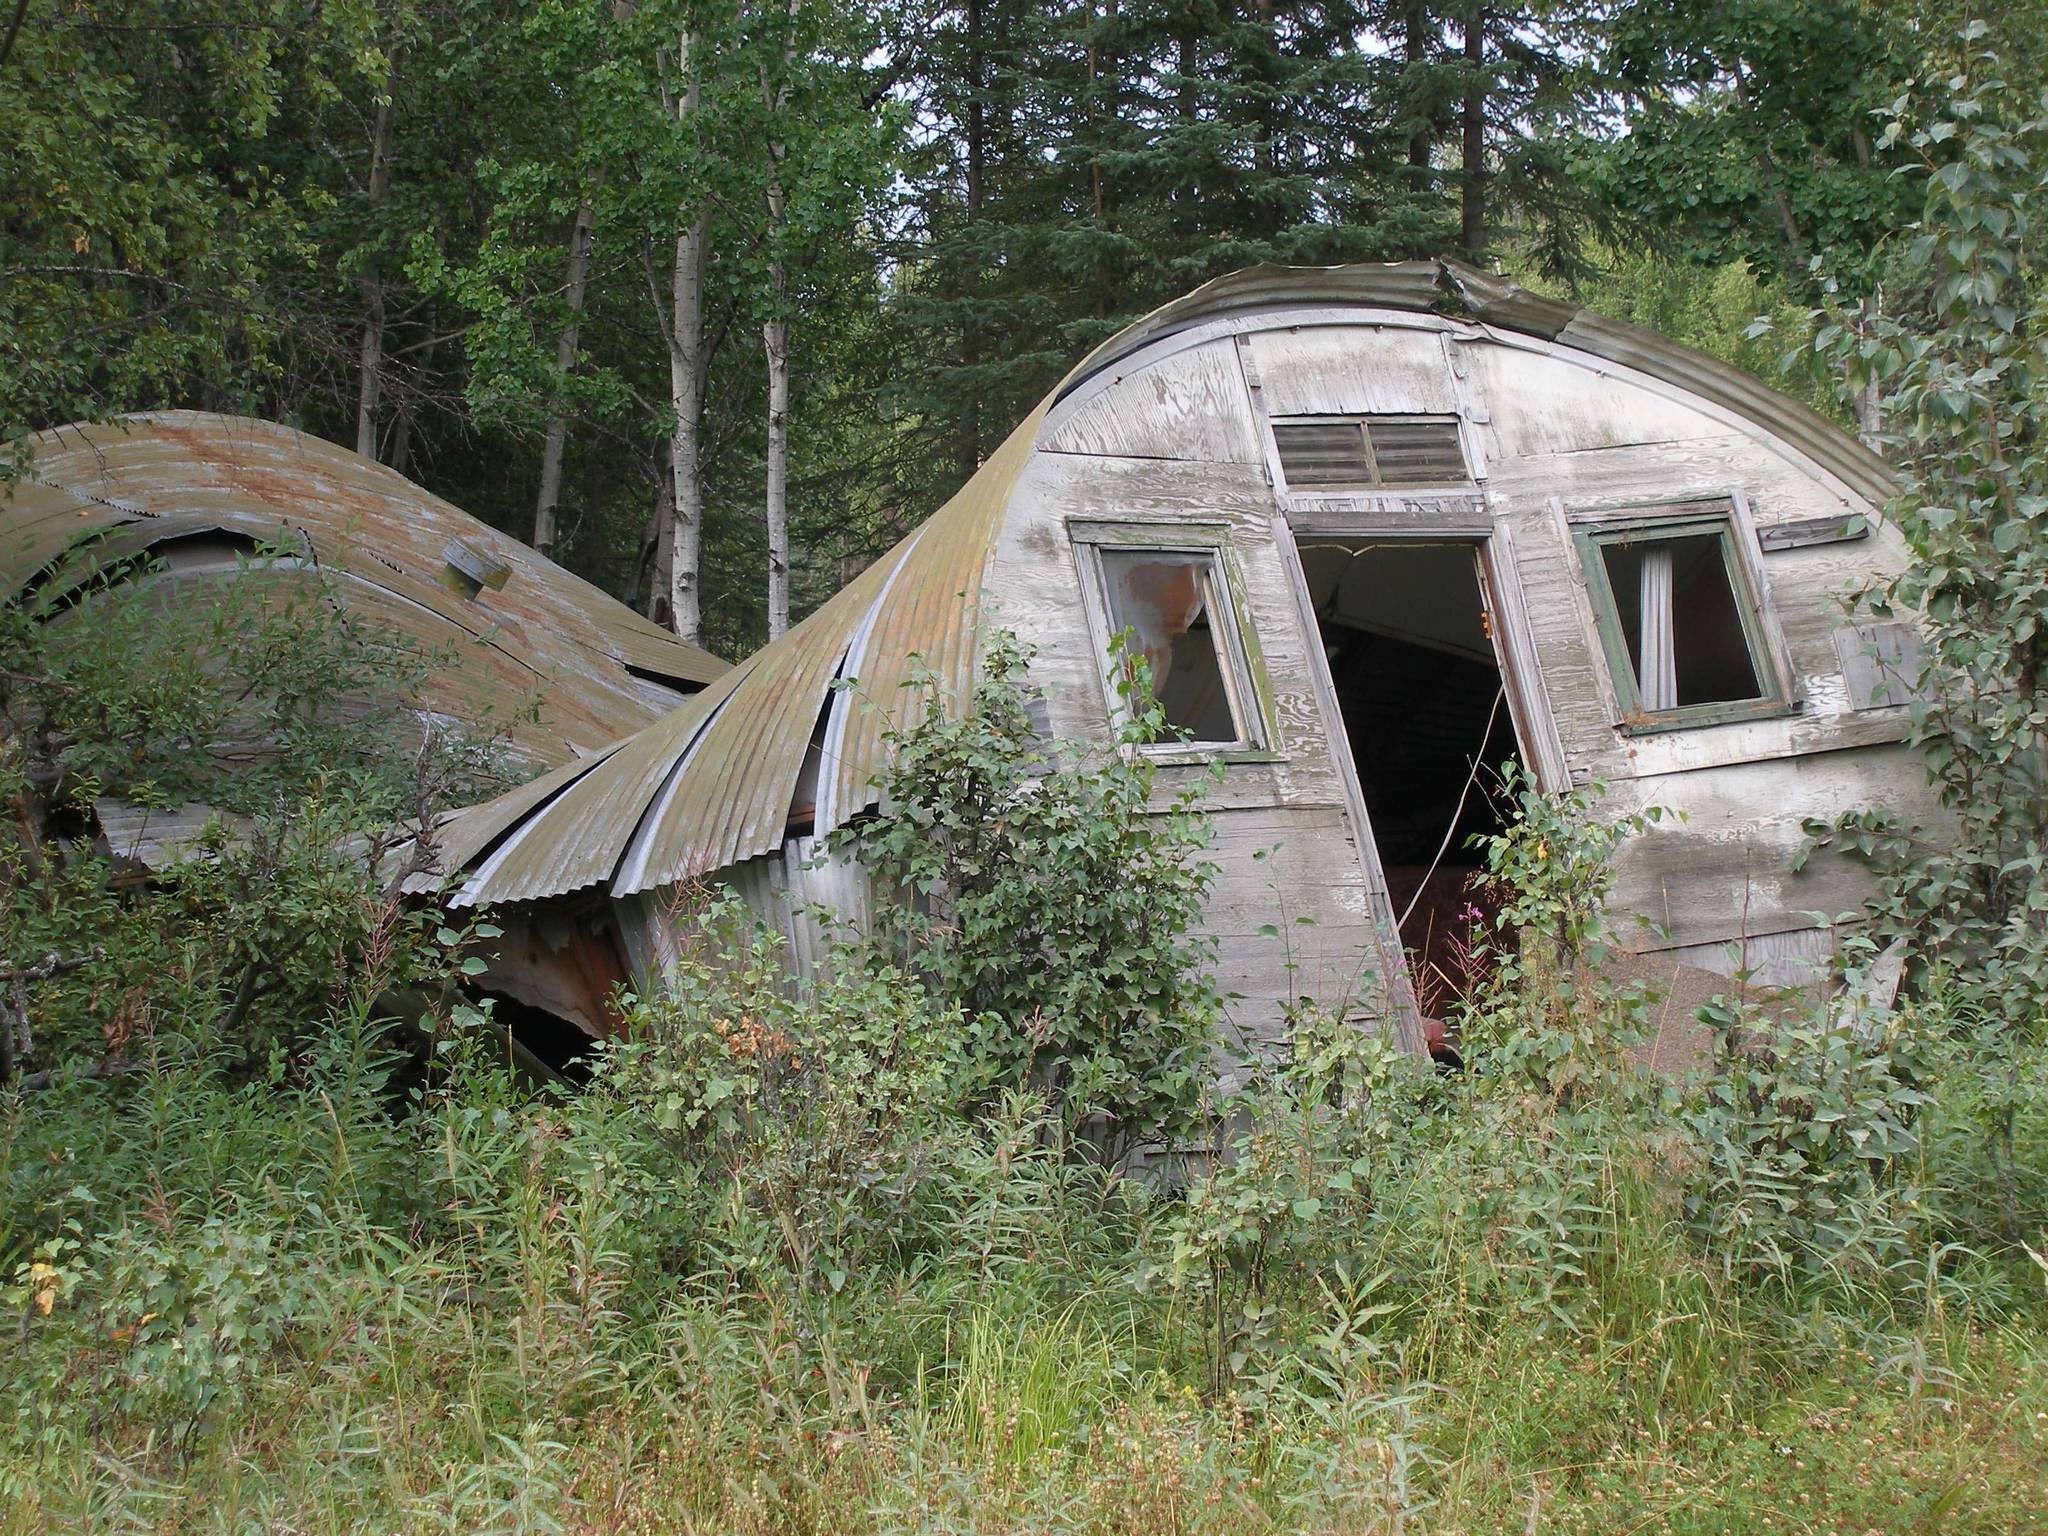 Sometimes called “Murder House” in the years after the killing, this dilapidated Quonset hut was the scene of the crime. (2007 photo by Clark Fair)